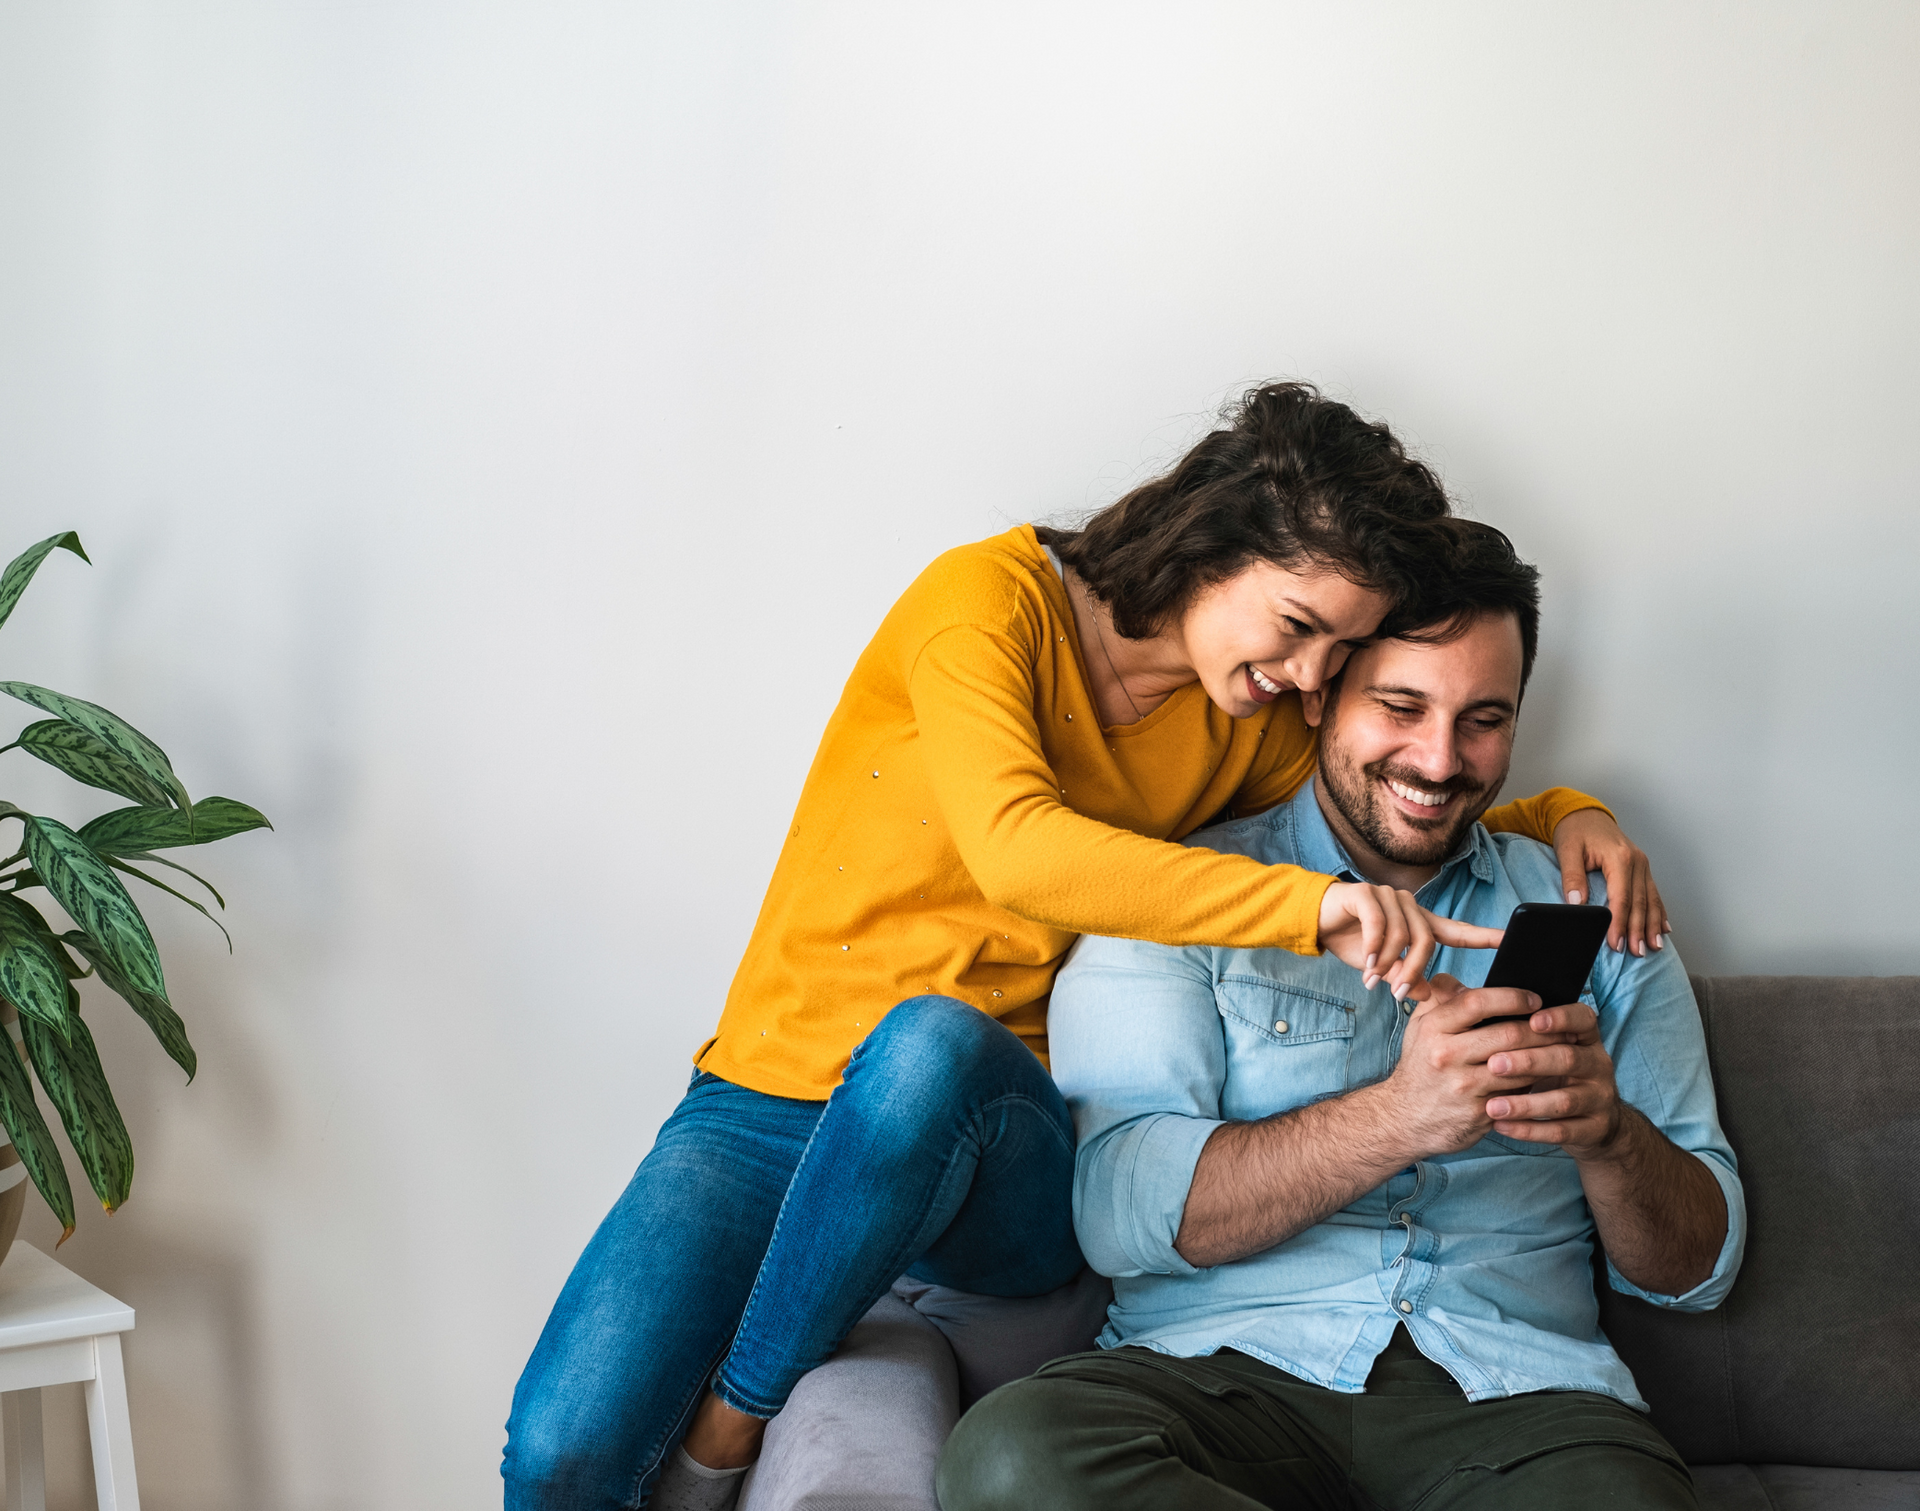 Young couple happily looking at phone together on couch